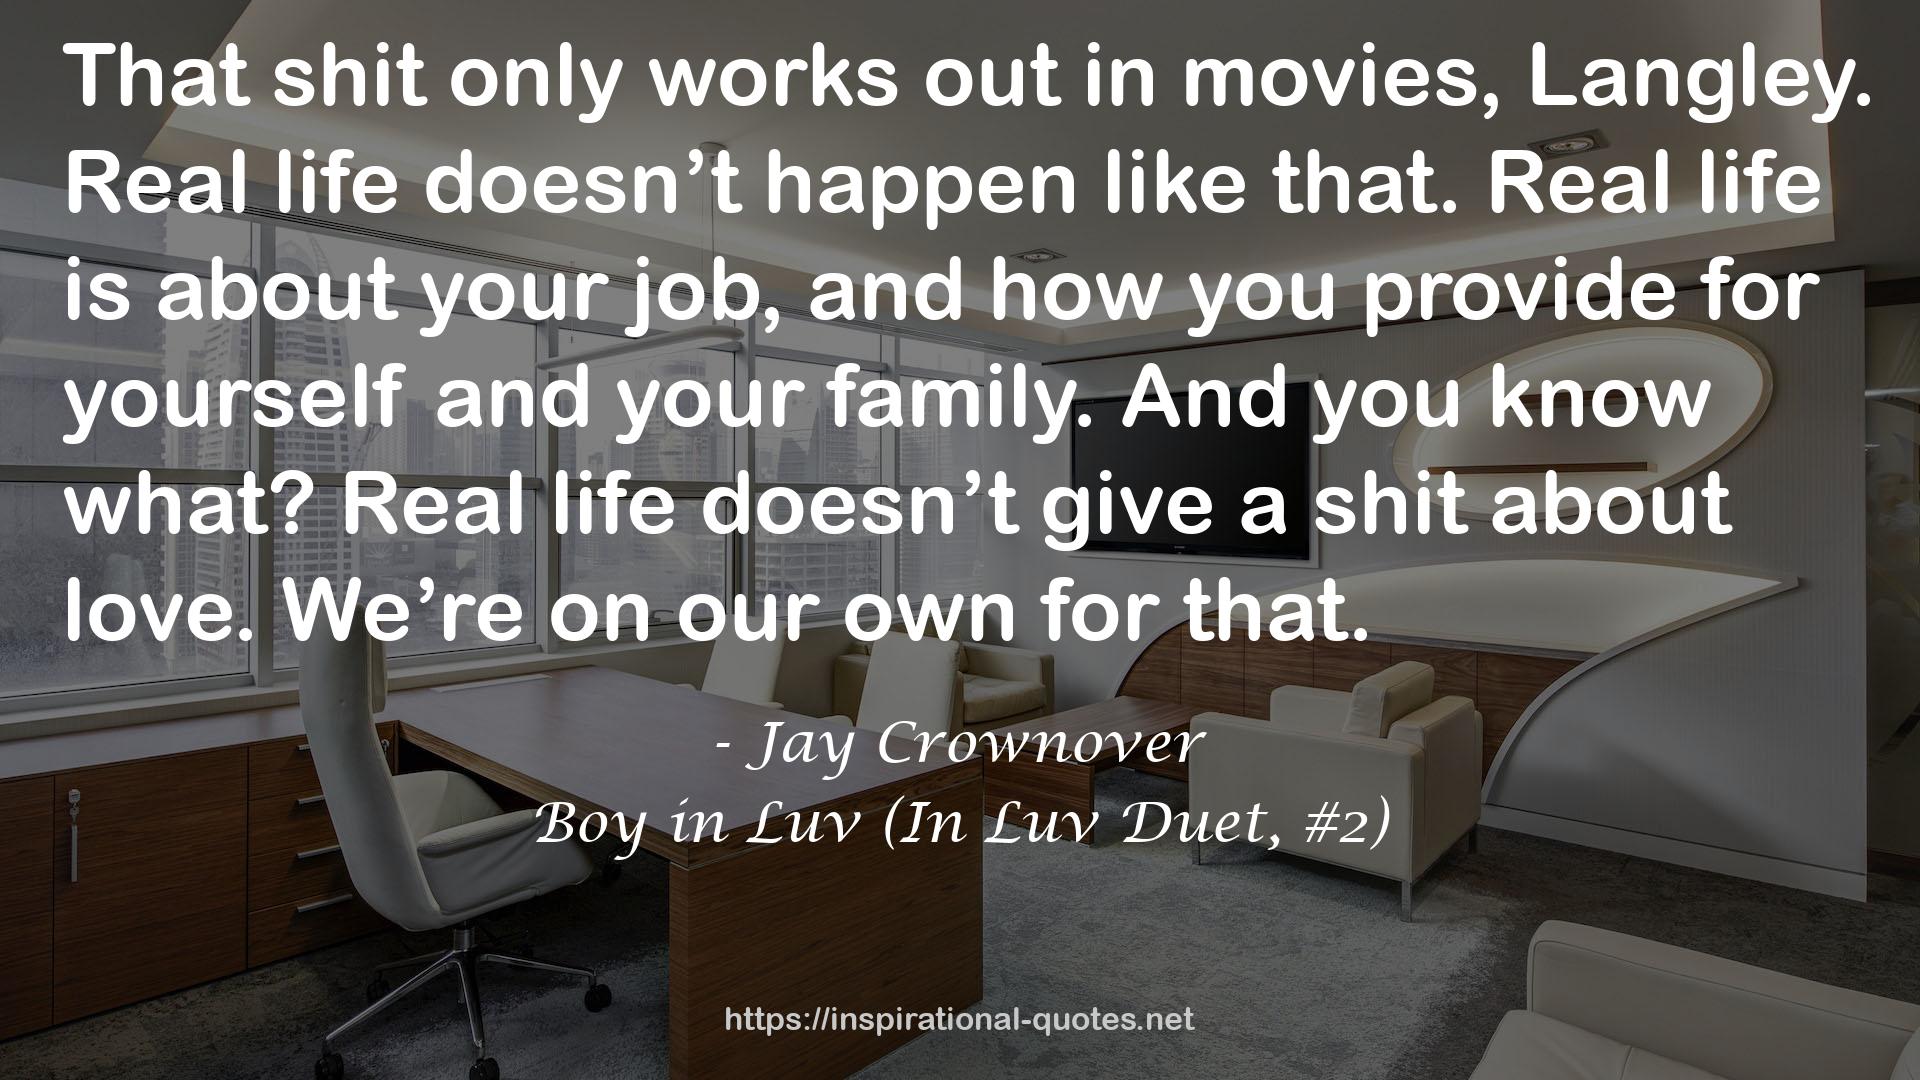 Boy in Luv (In Luv Duet, #2) QUOTES